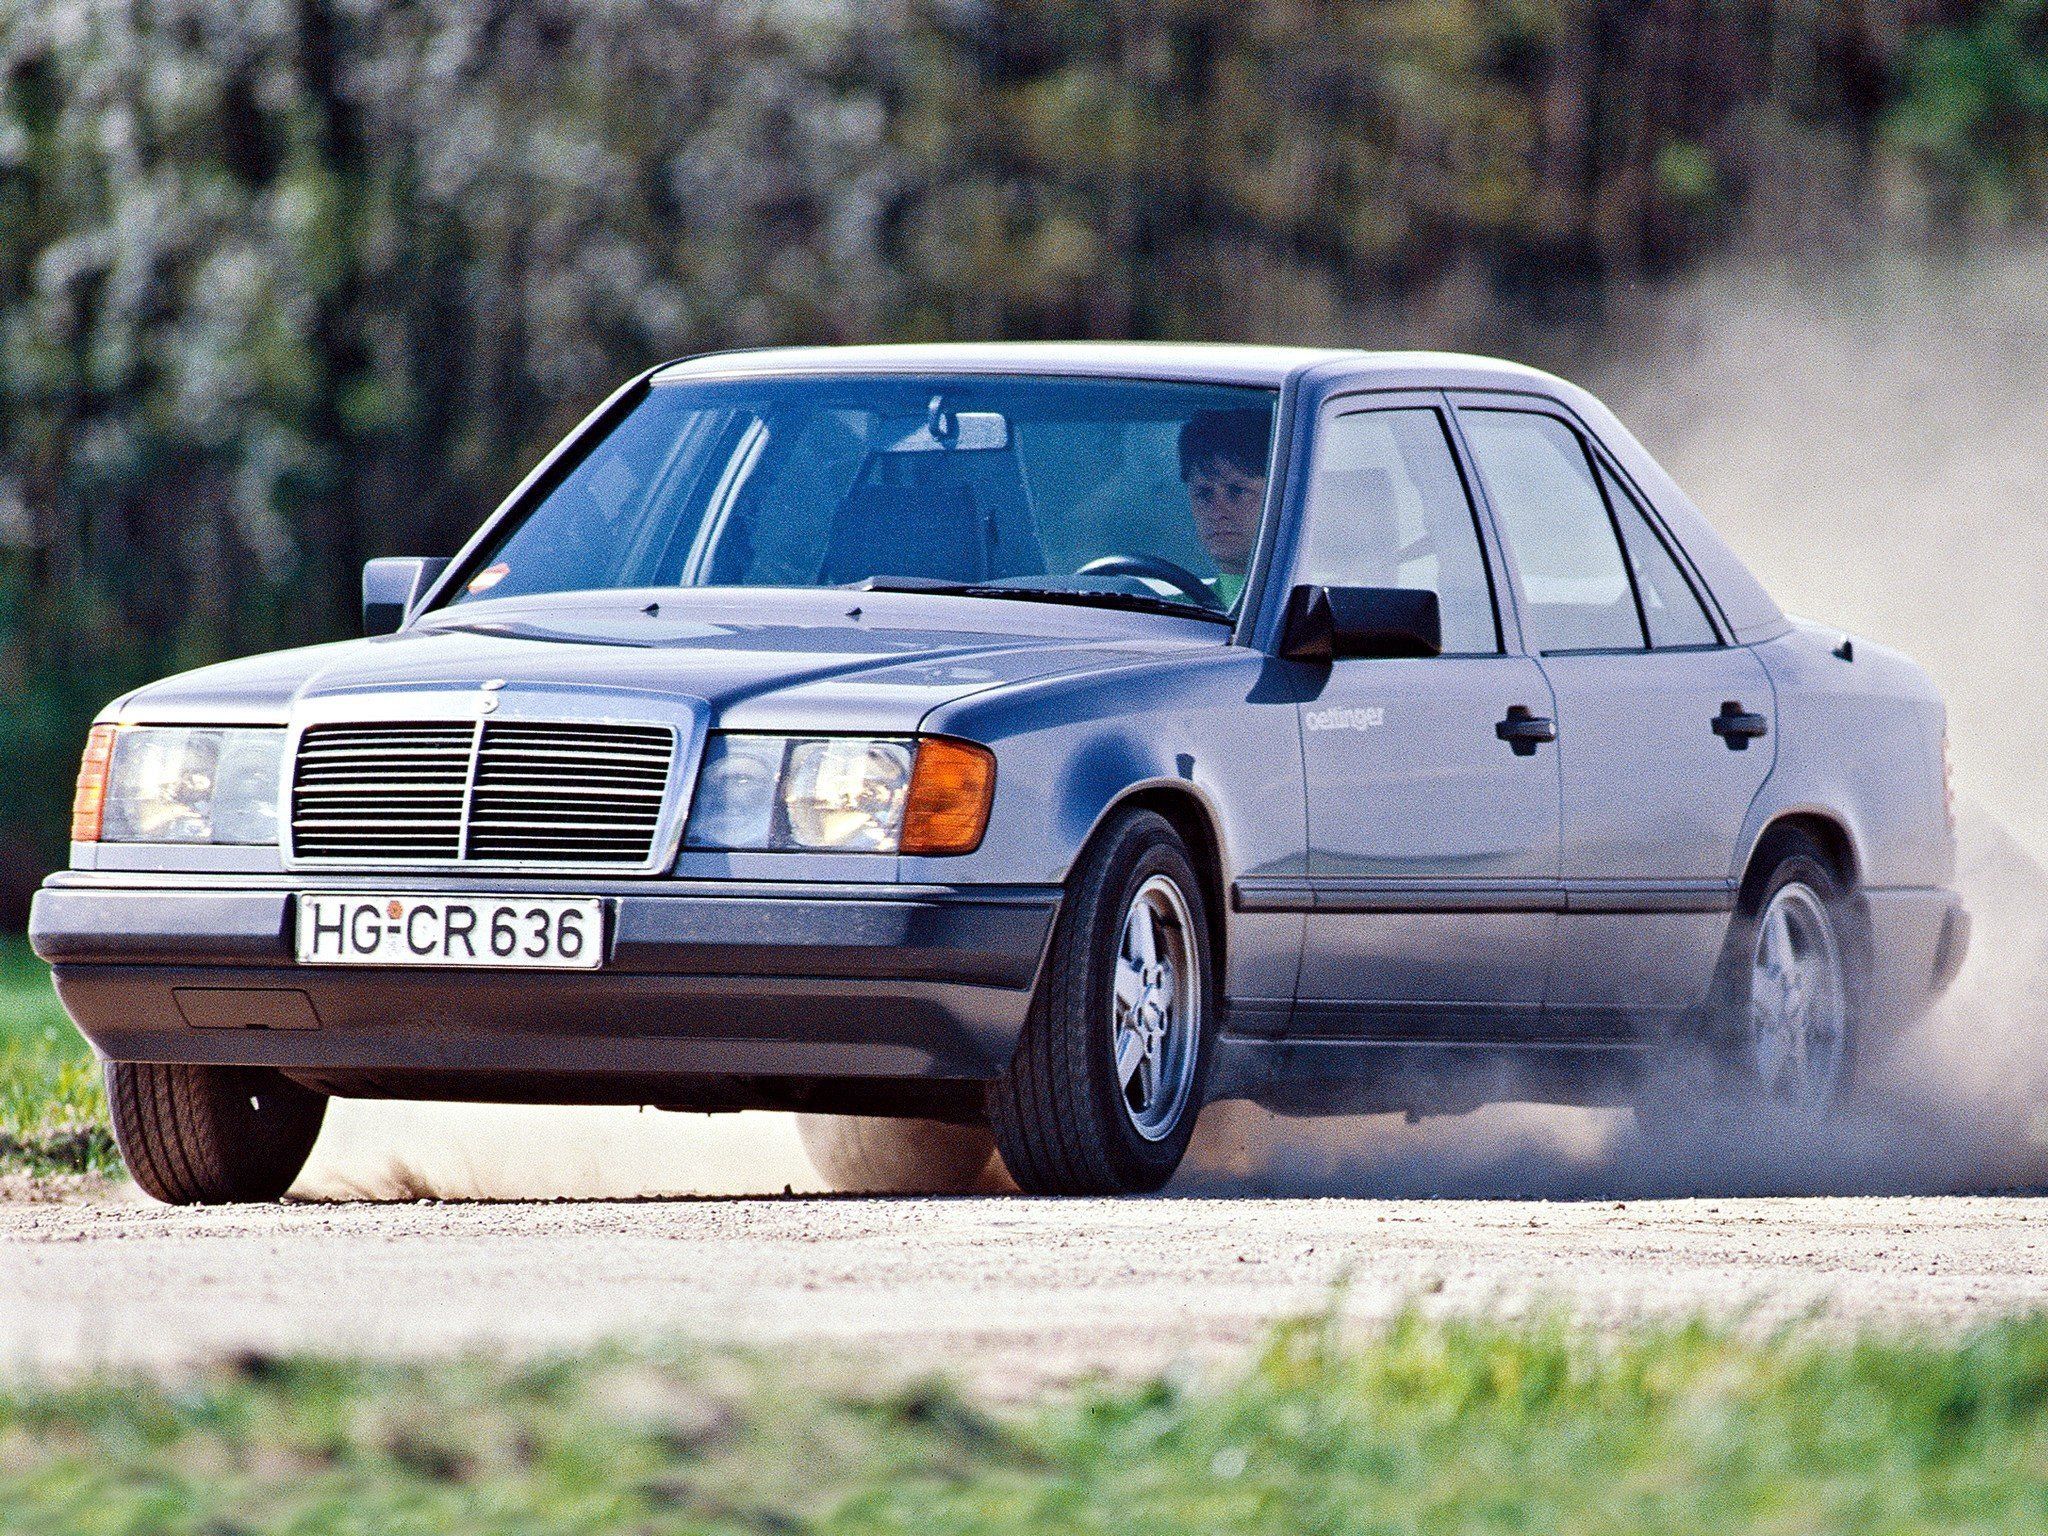 Mercedes Benz E Class W124. The Affordable Luxury Cruiser?